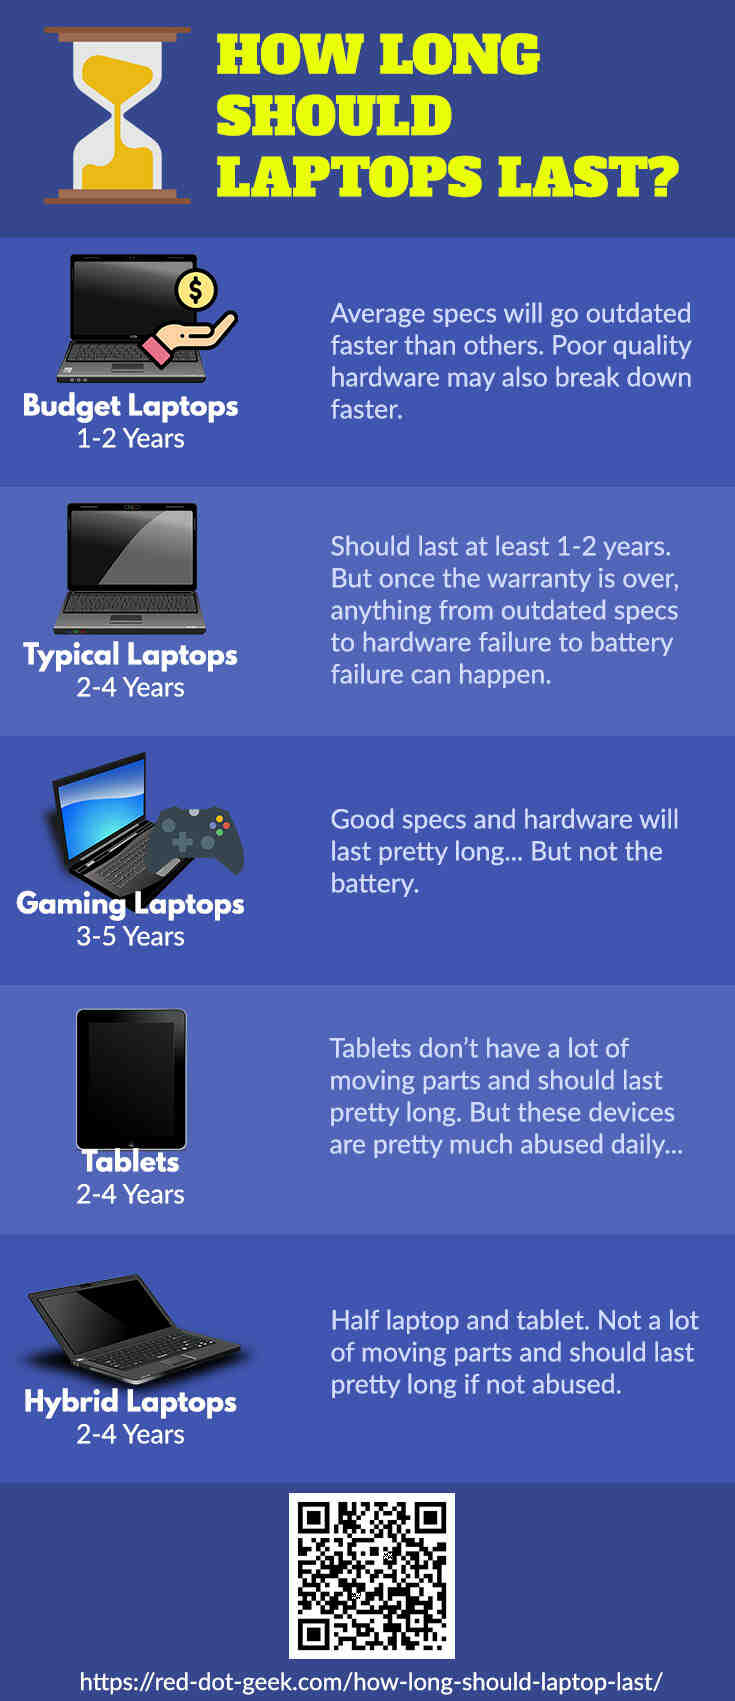 How to Can a laptop last 20 years?